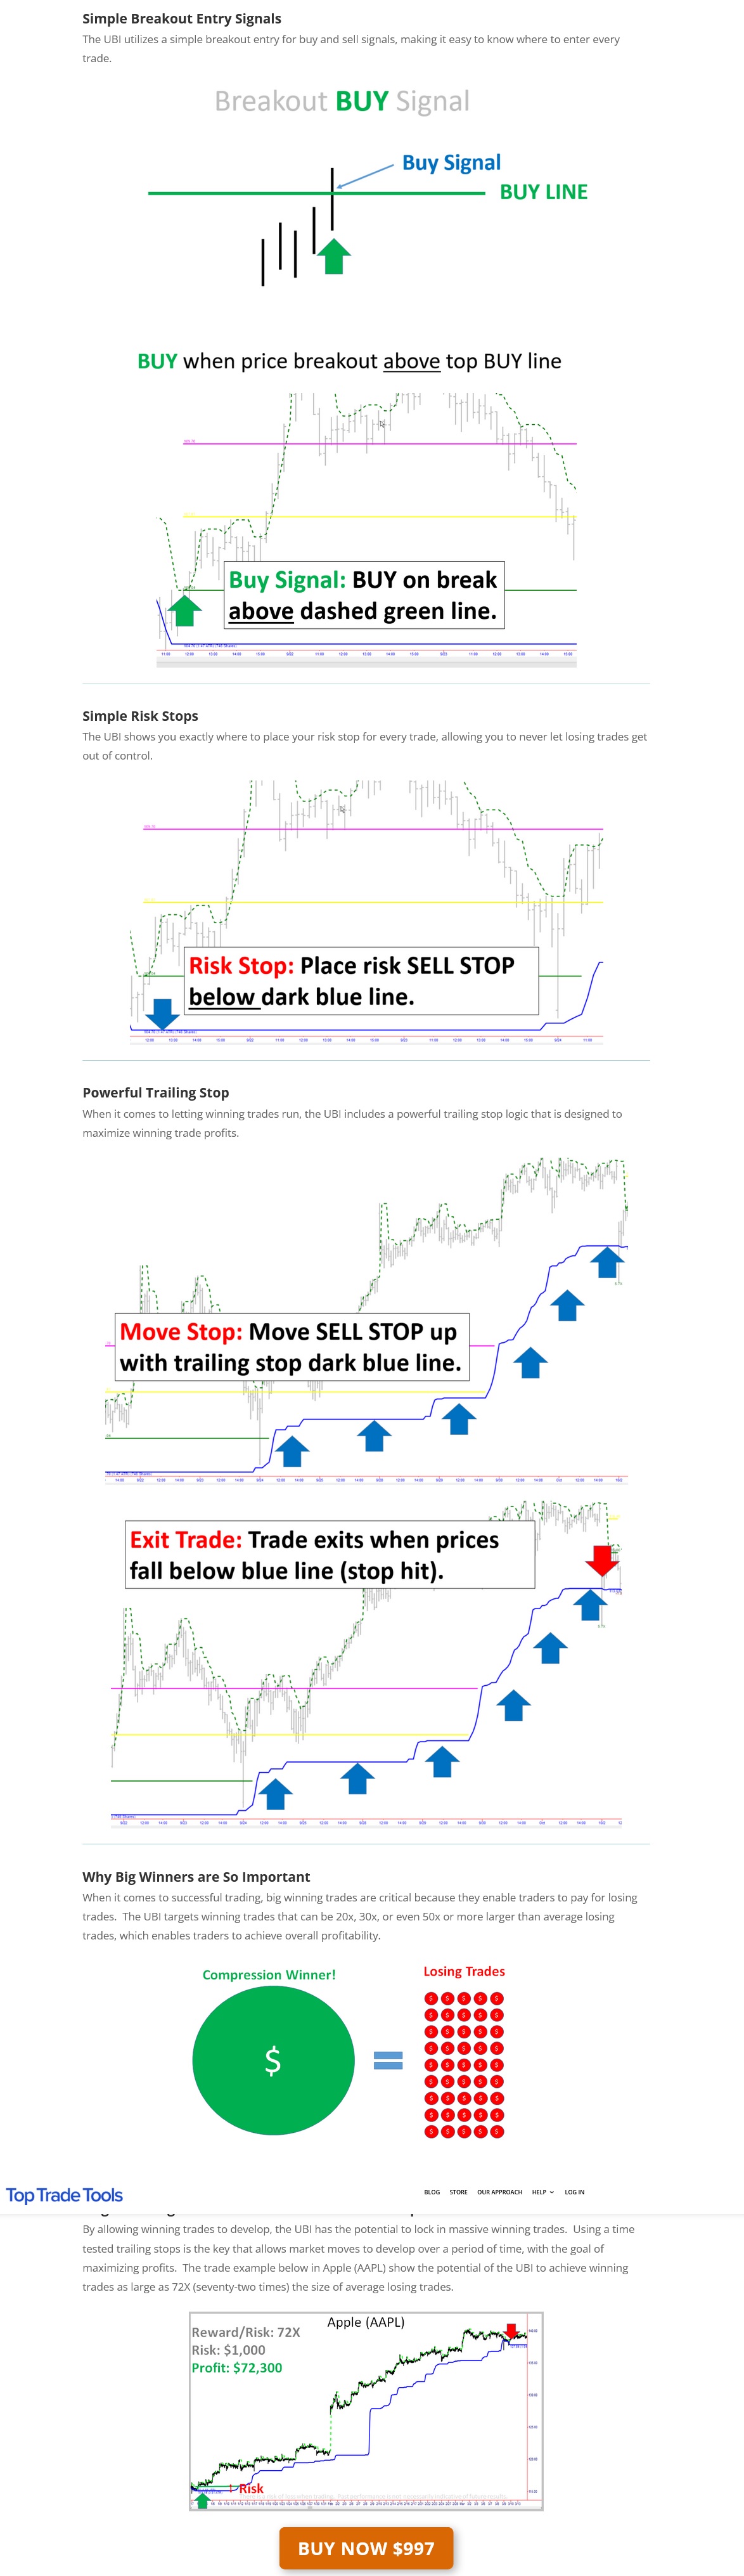 Top-Trade-Tools-RPM-Trading-Strategy-Indicator-Masterclass-1